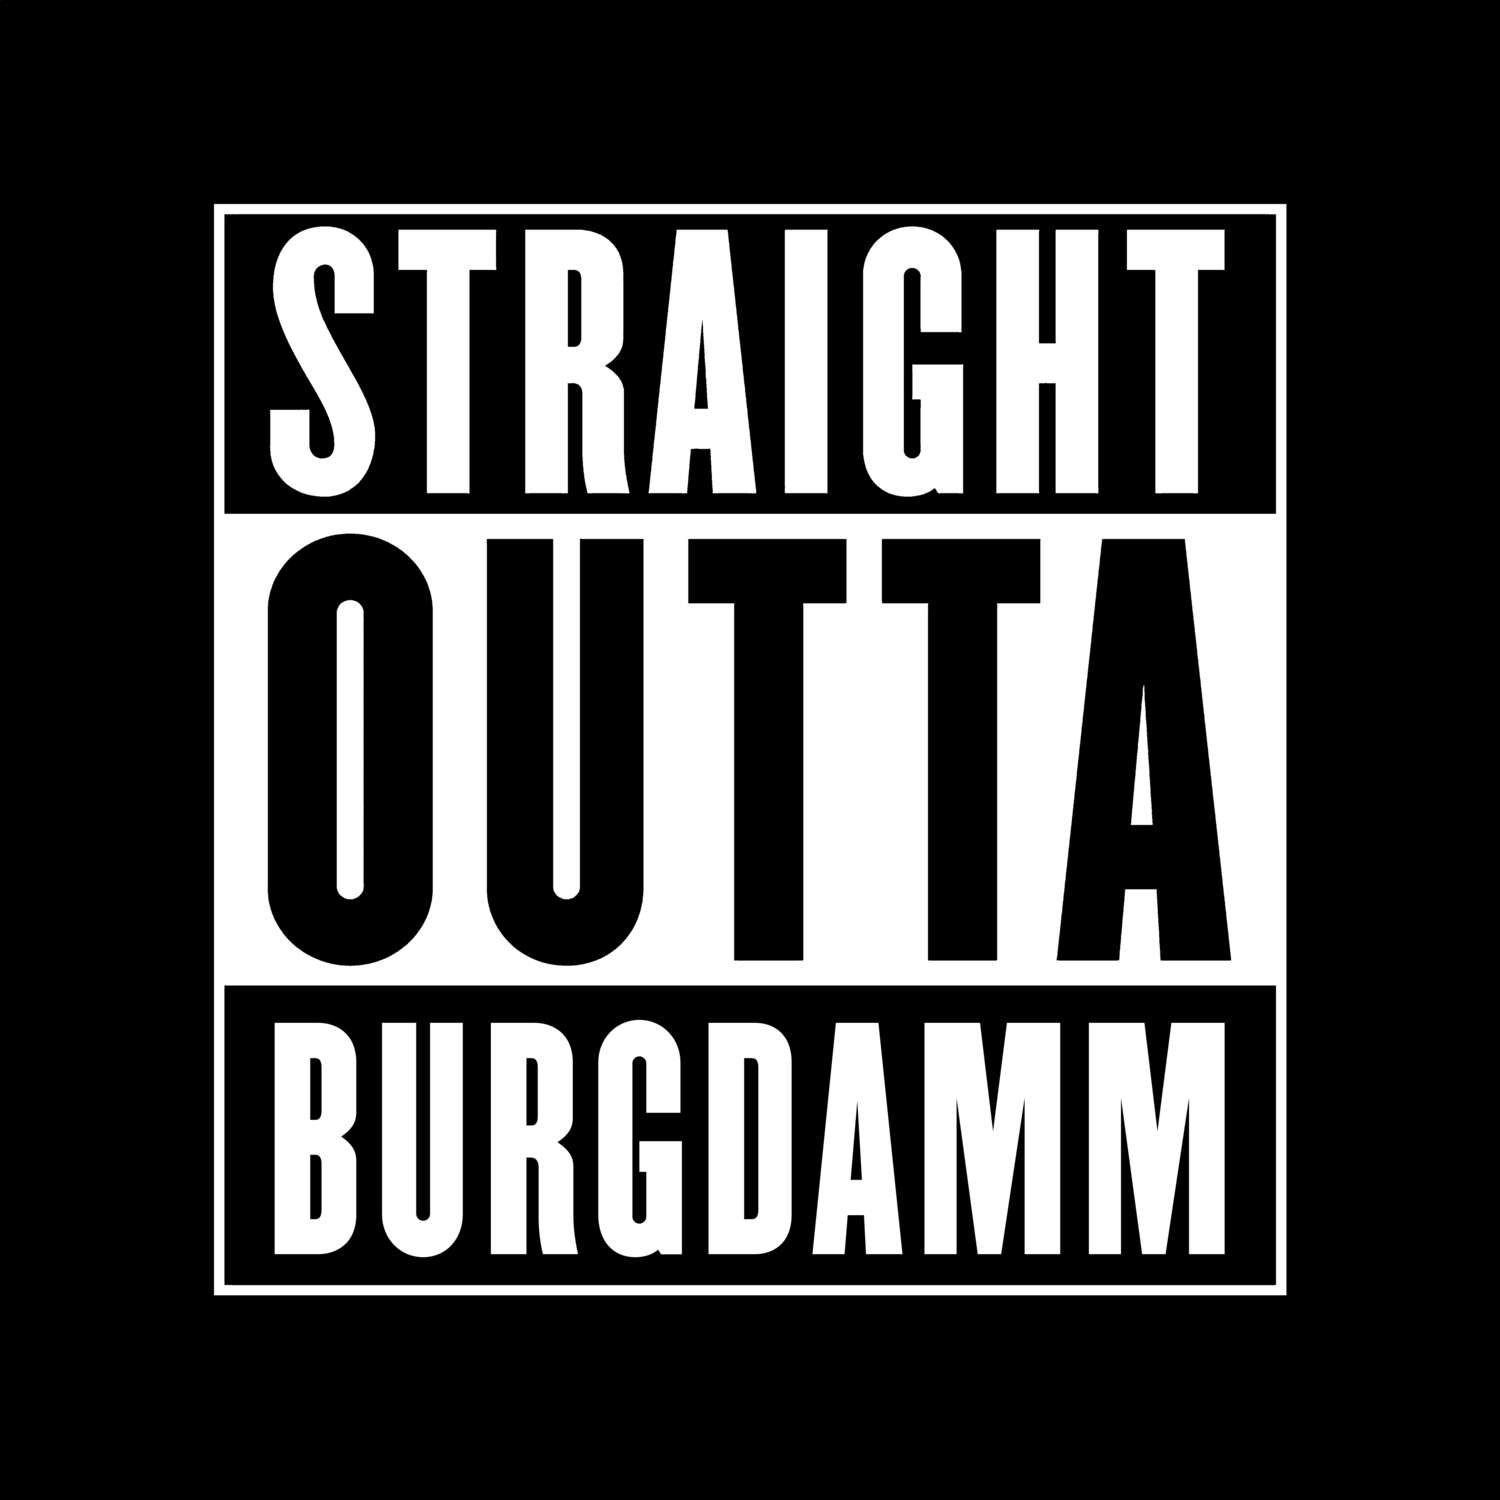 Burgdamm T-Shirt »Straight Outta«